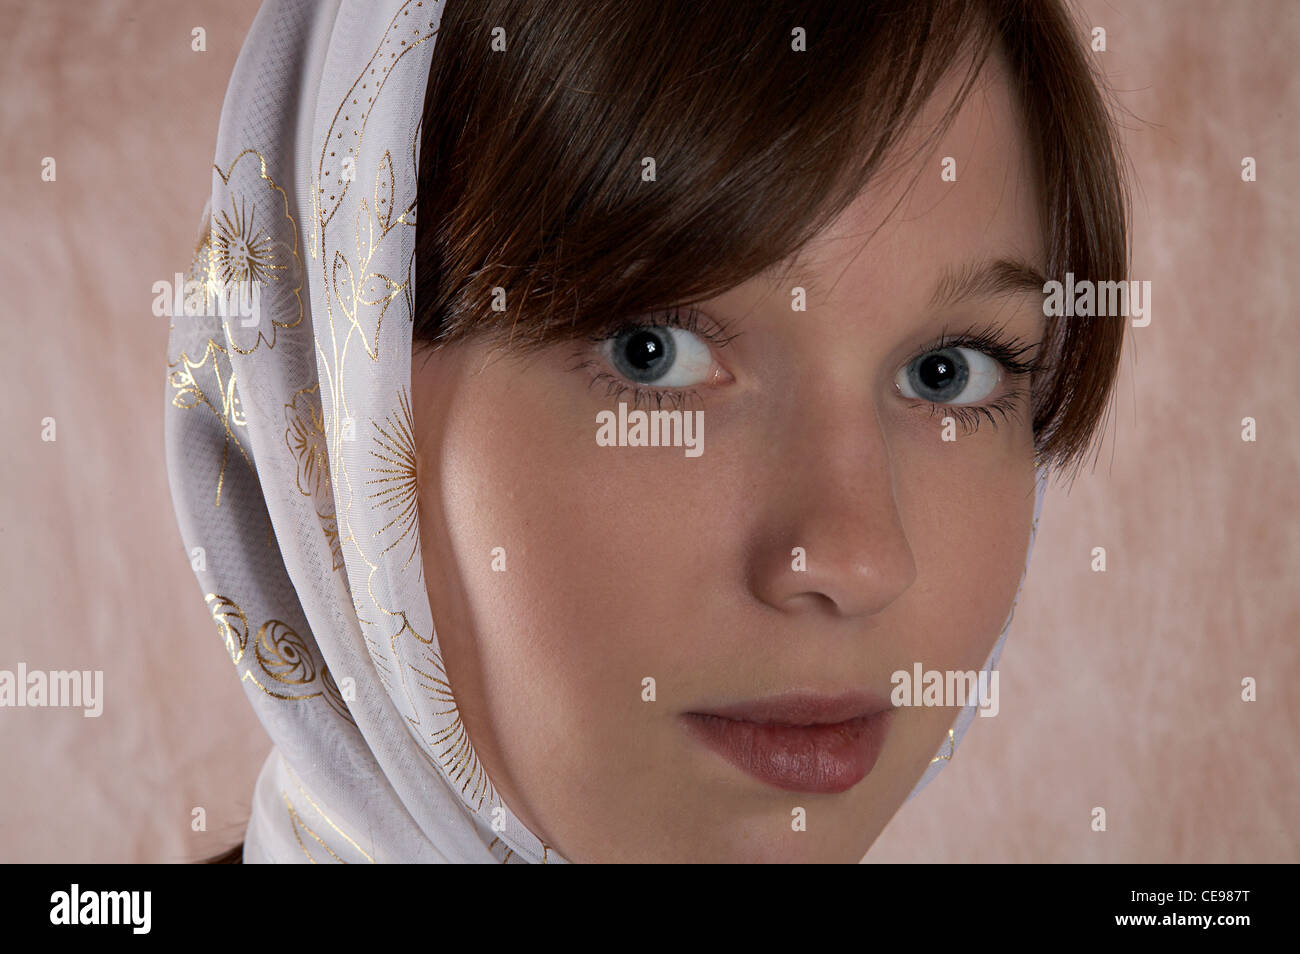 Portrait of the girl in a kerchief in an interior Stock Photo